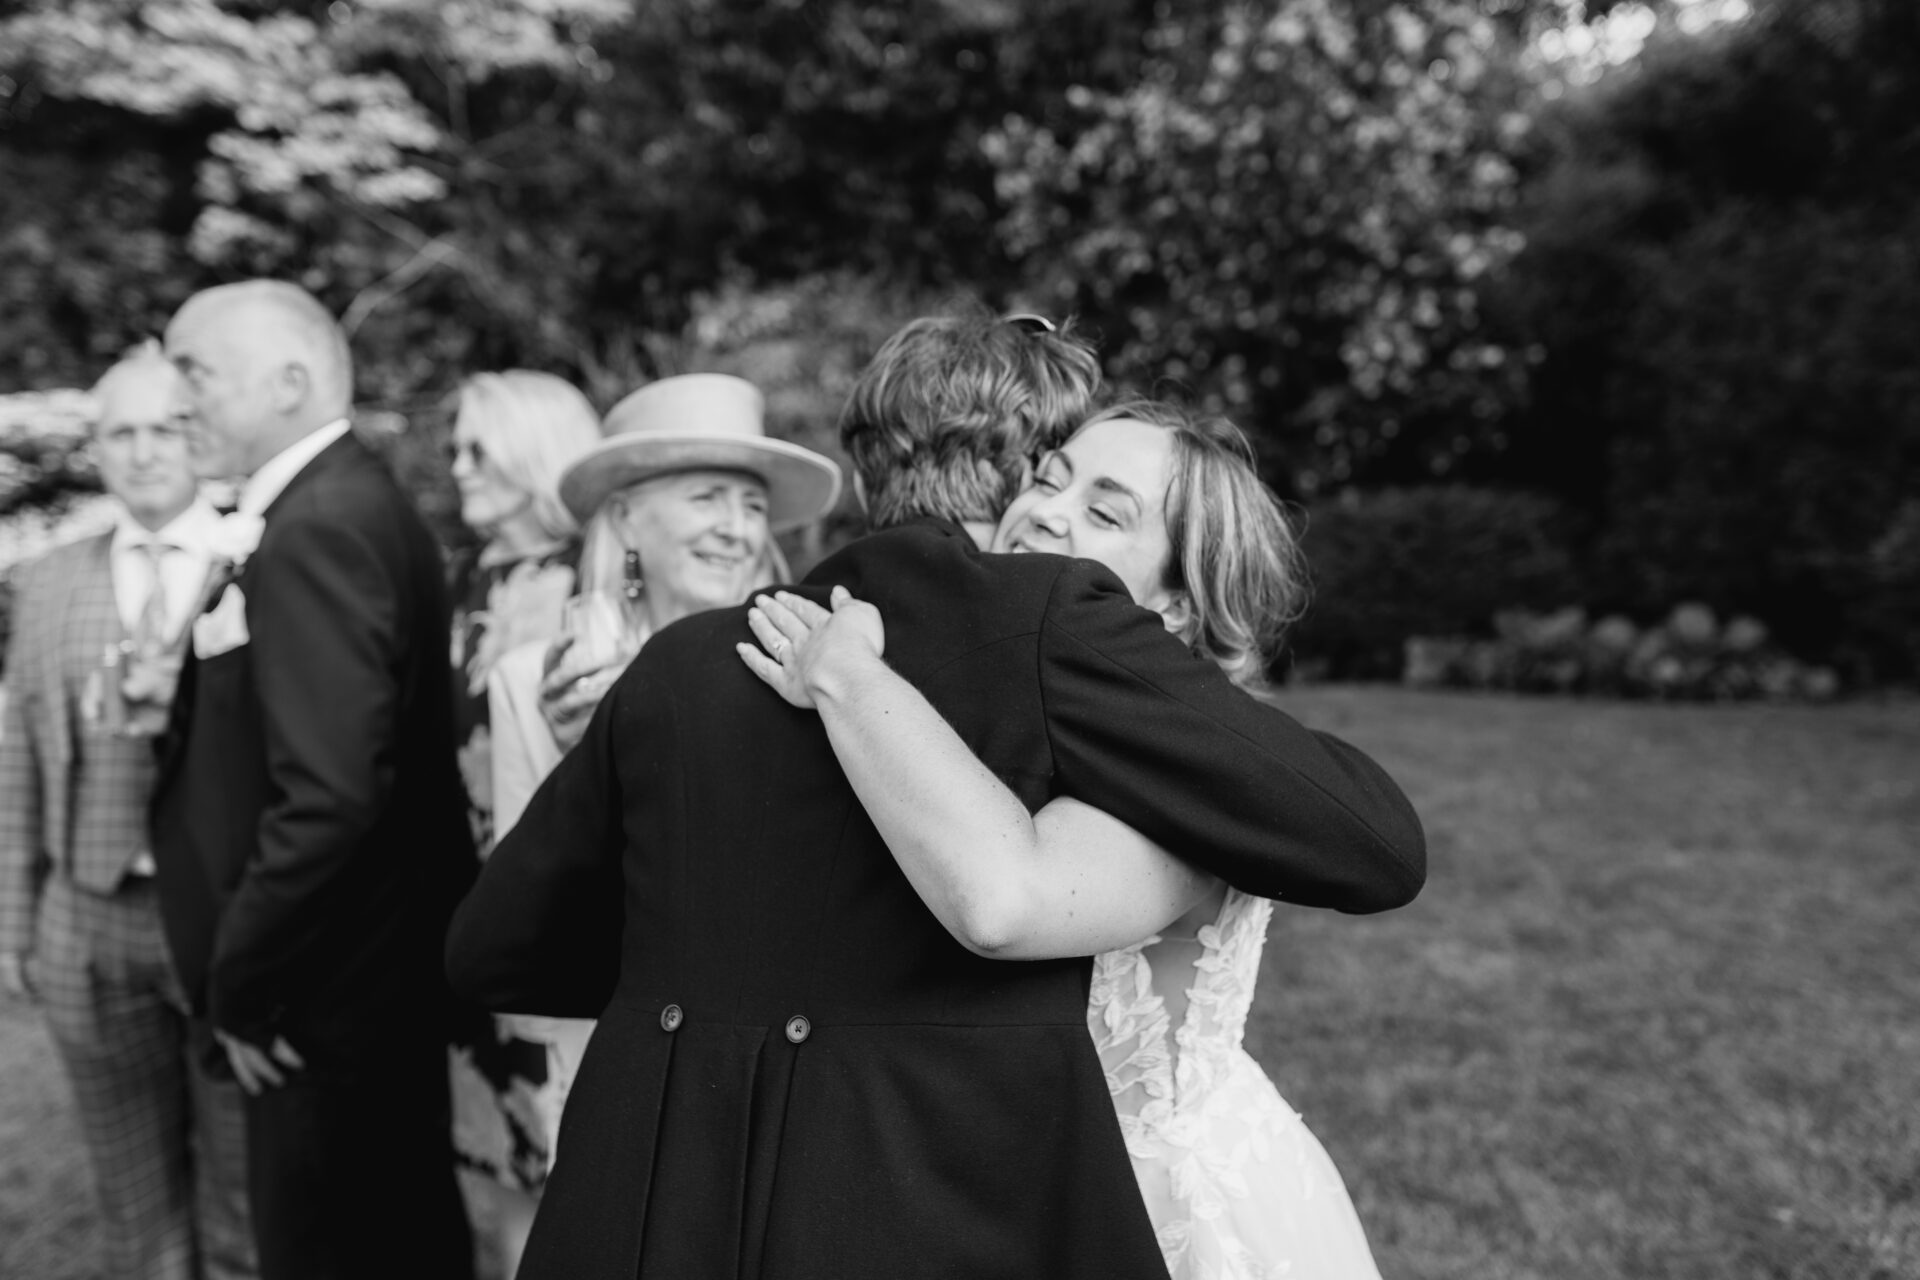 The bride embraces a wedding guest at Old Luxters Barn wedding venue in Oxfordshire